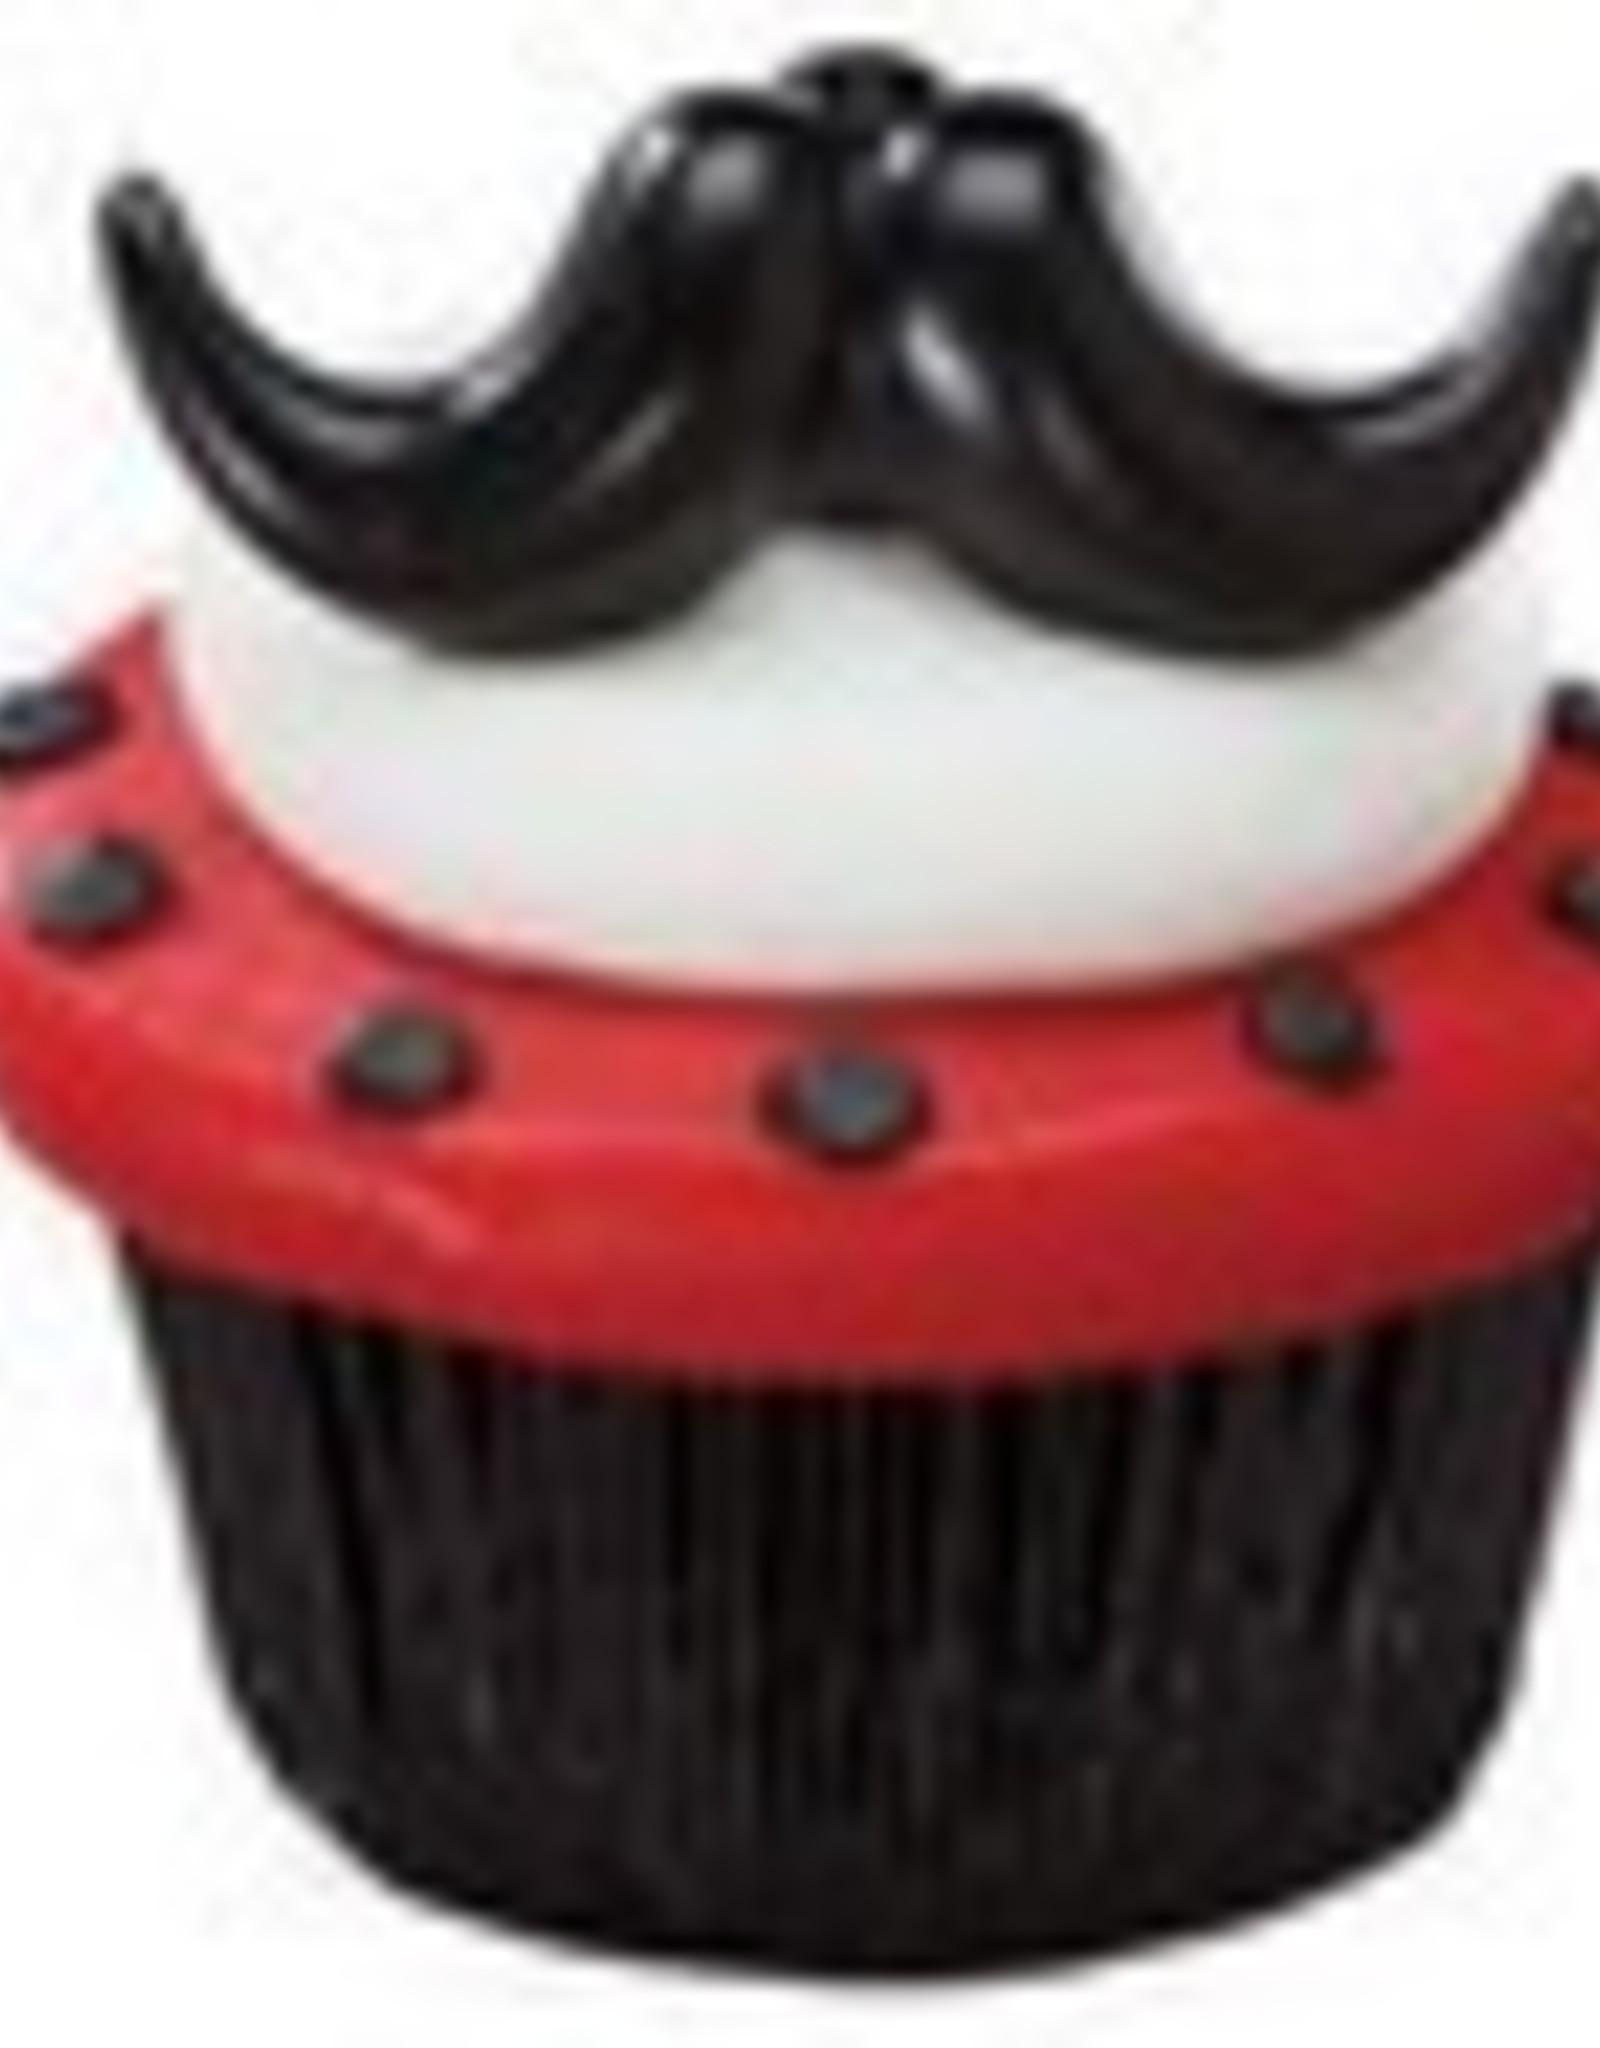 Moustache Cupcake Ring